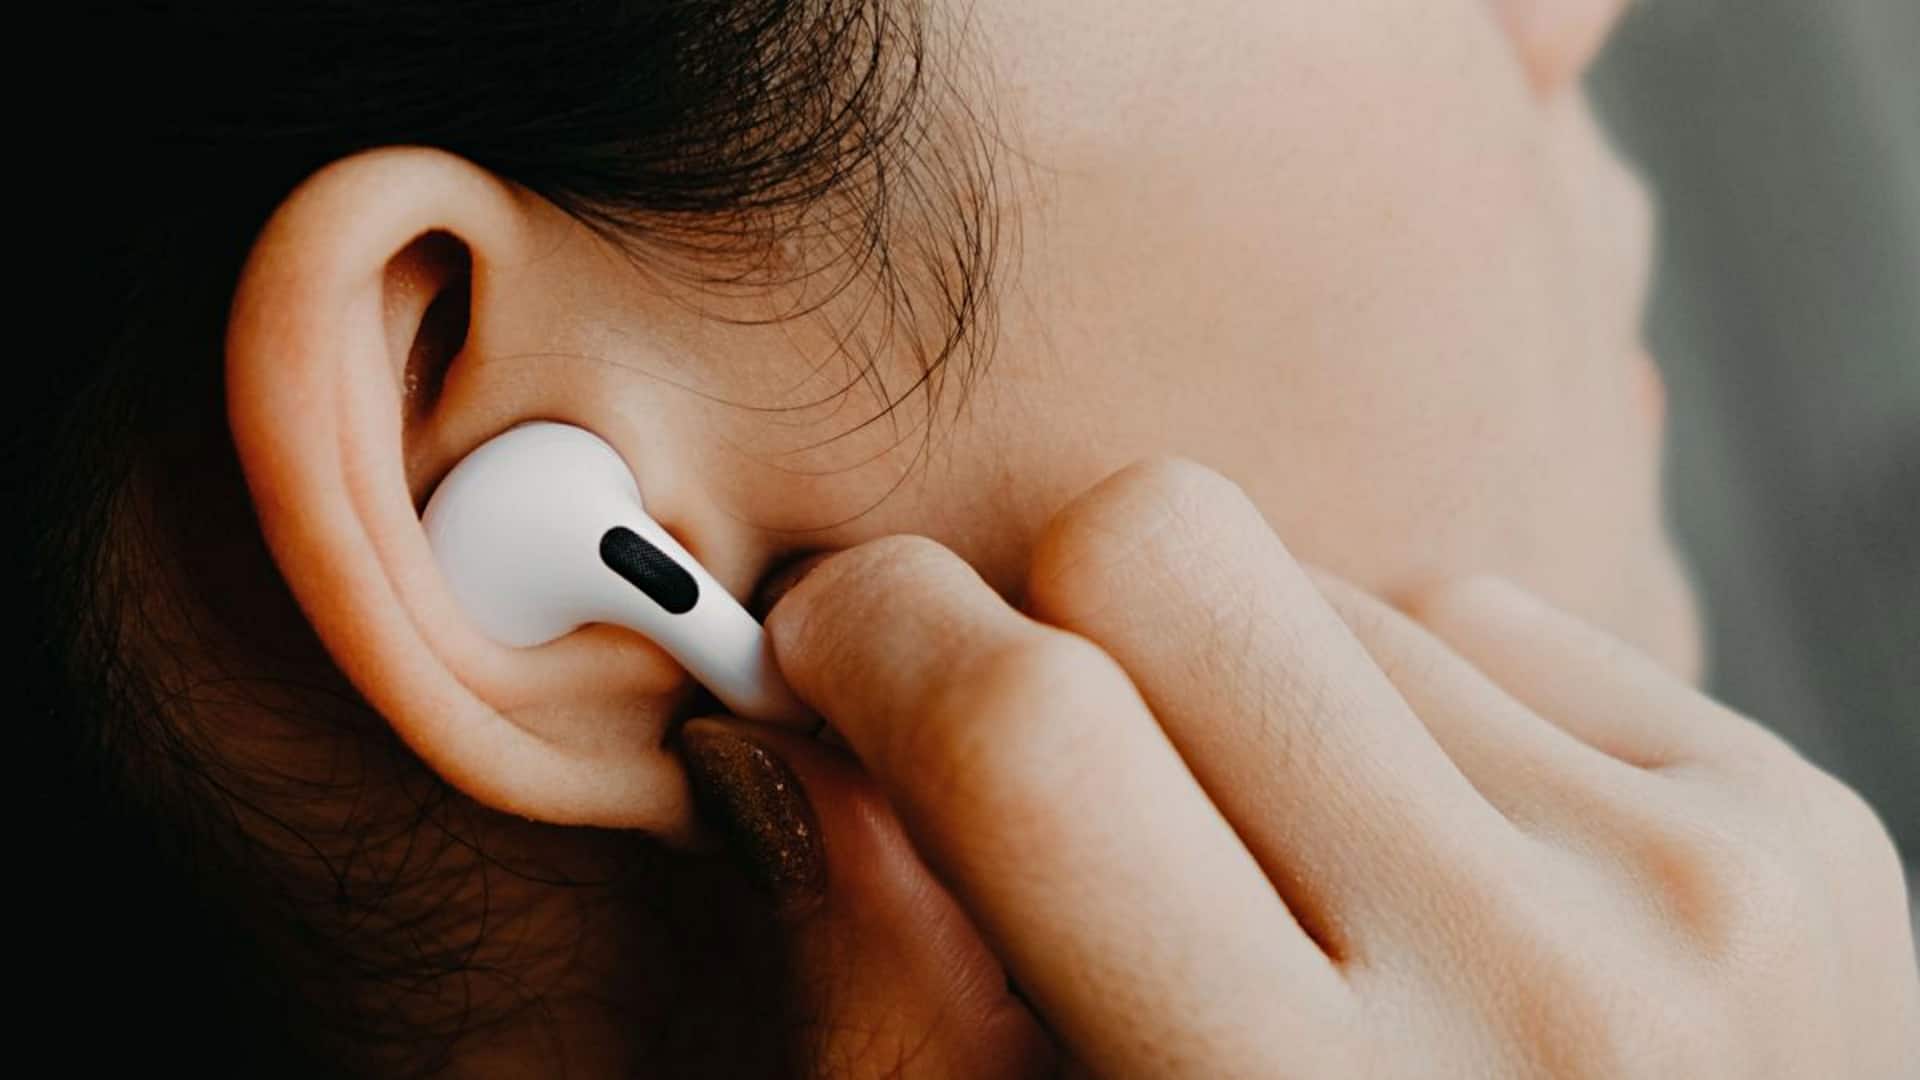 iOS 18 to introduce 'hearing aid mode' for AirPods Pro